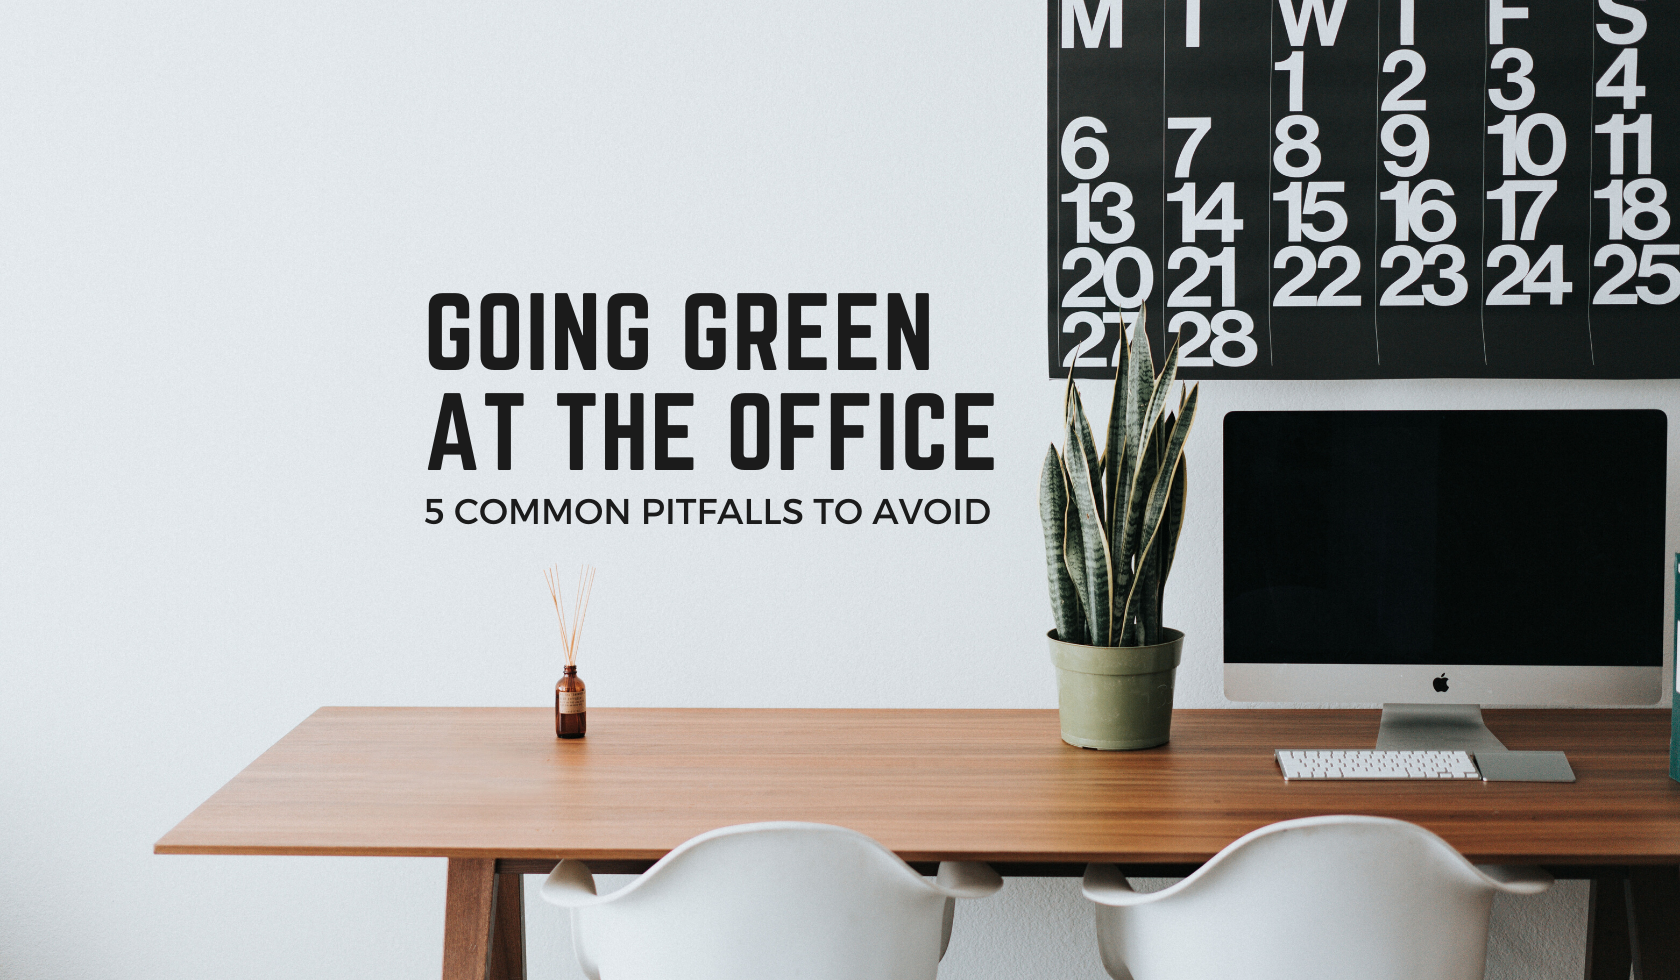 Going Green in Your Office? Avoid these 5 Common Pitfalls